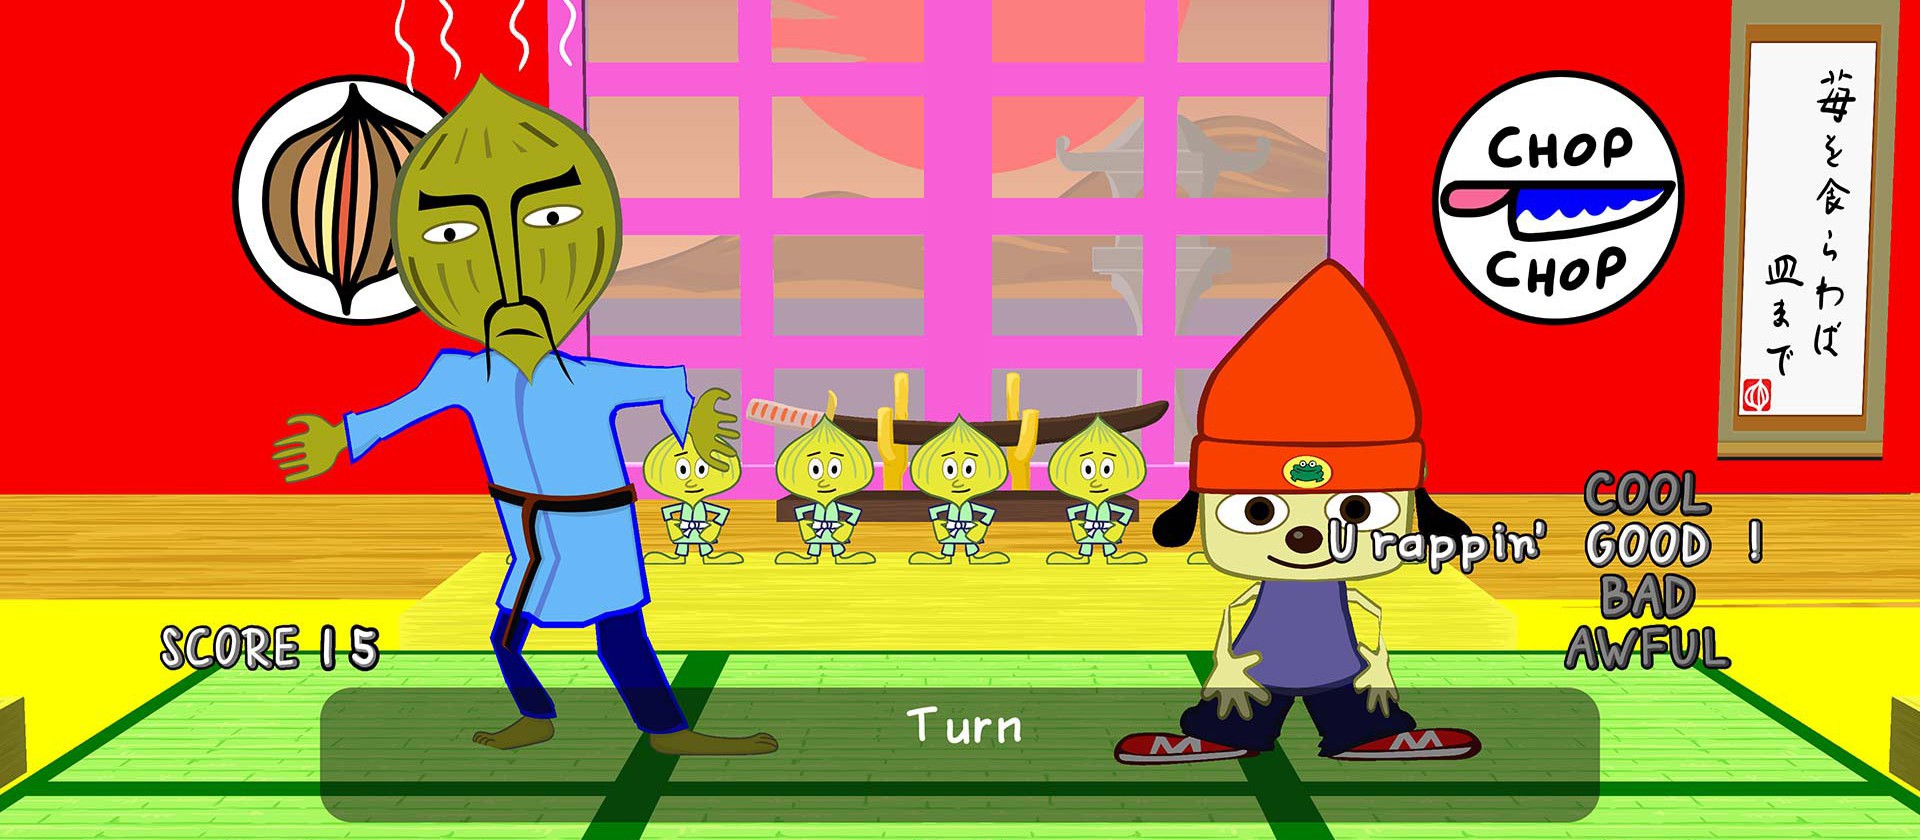 PaRappa : stage 1